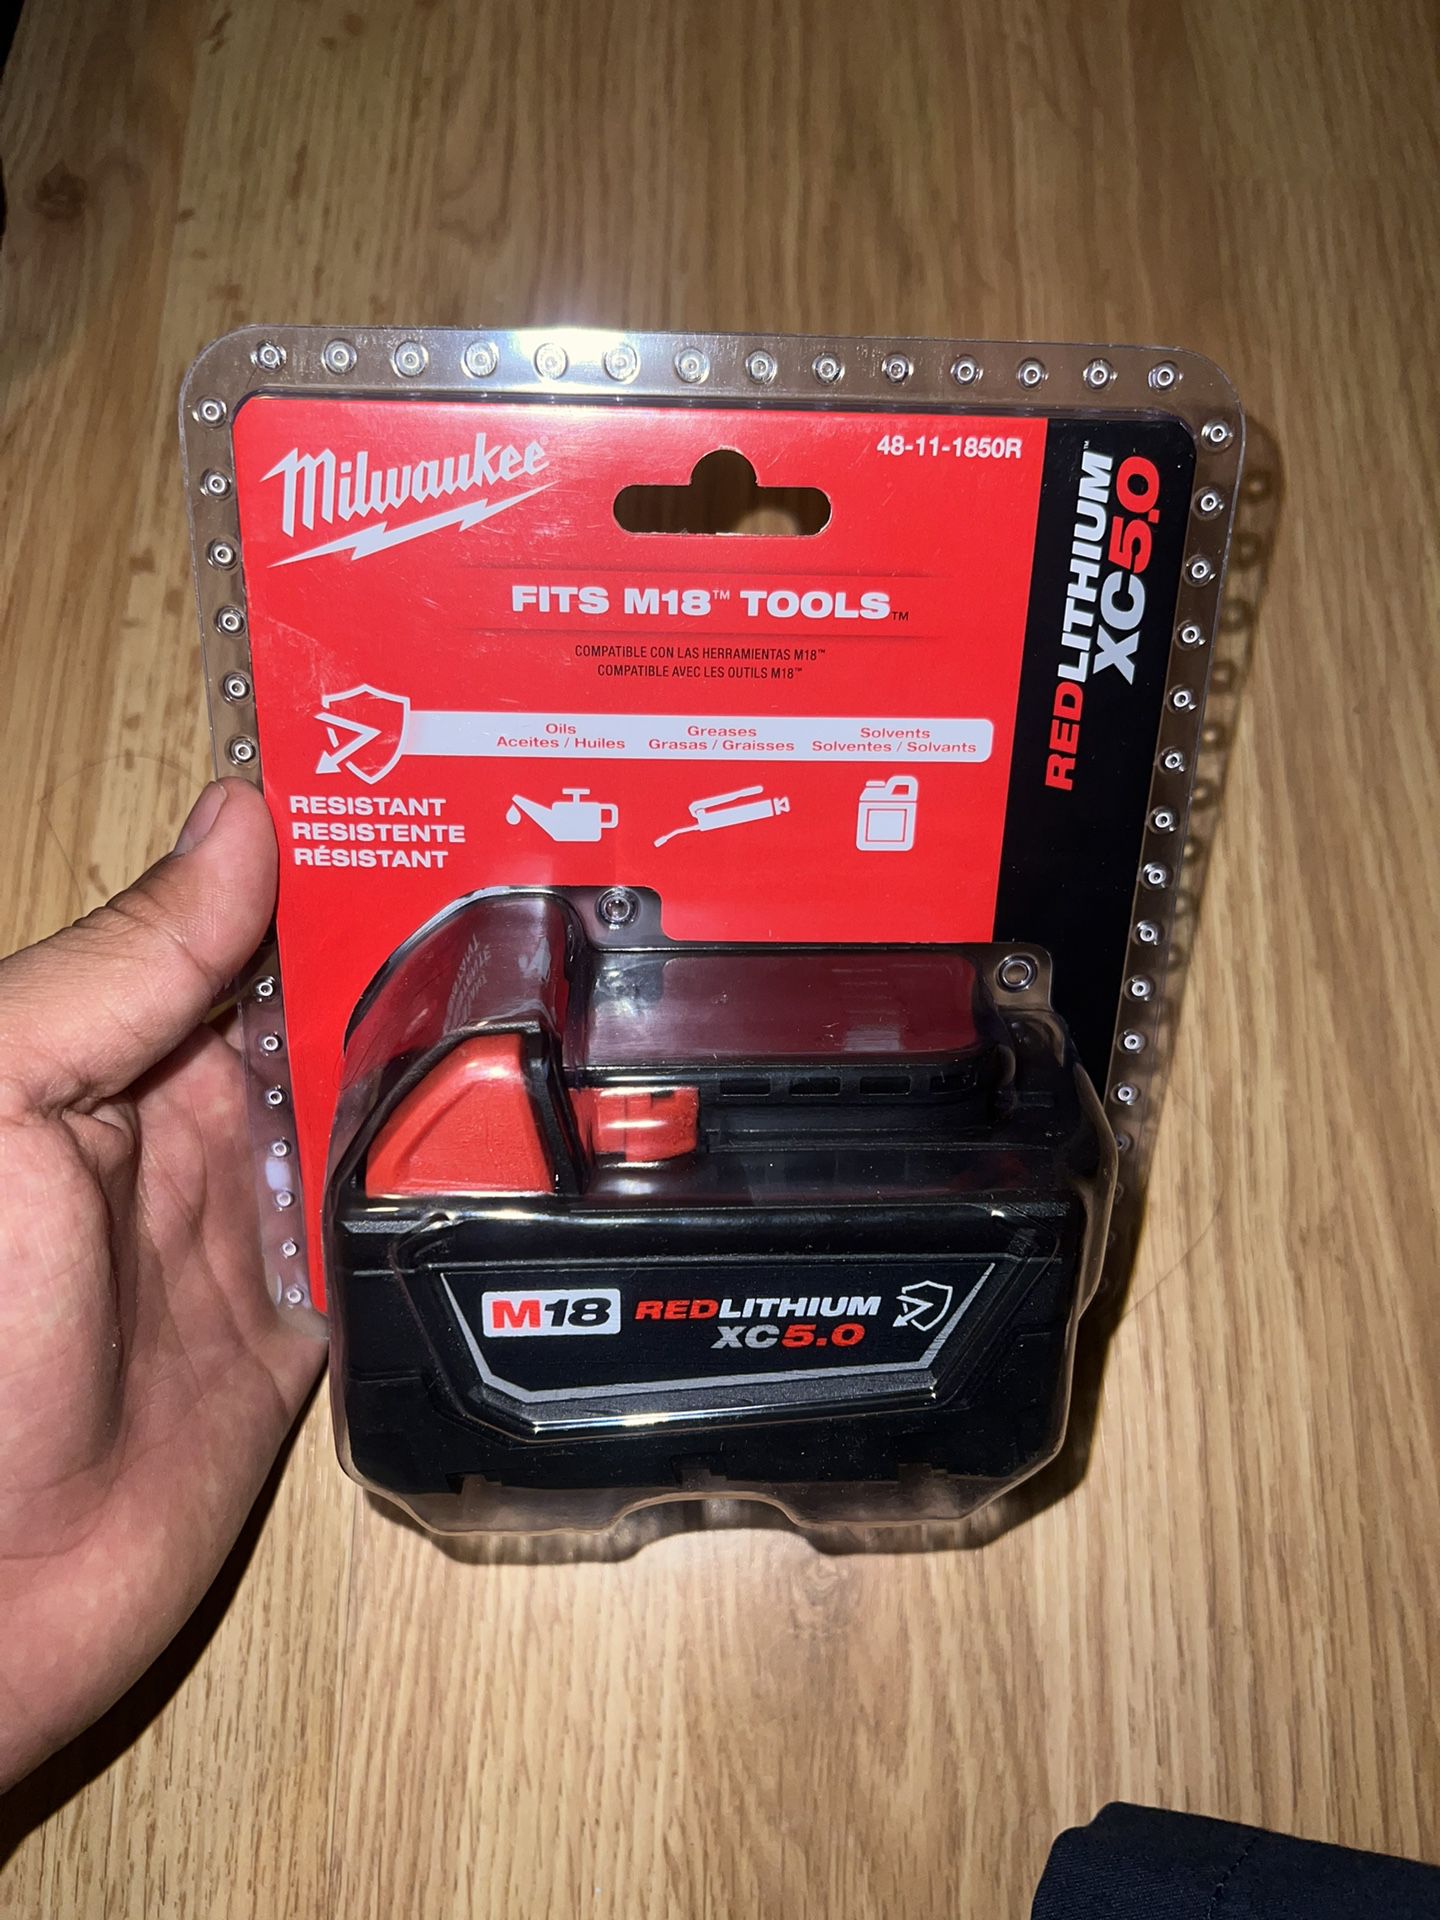 Milwaukee Red Lithium x5.0 battery (fits m18 tools)